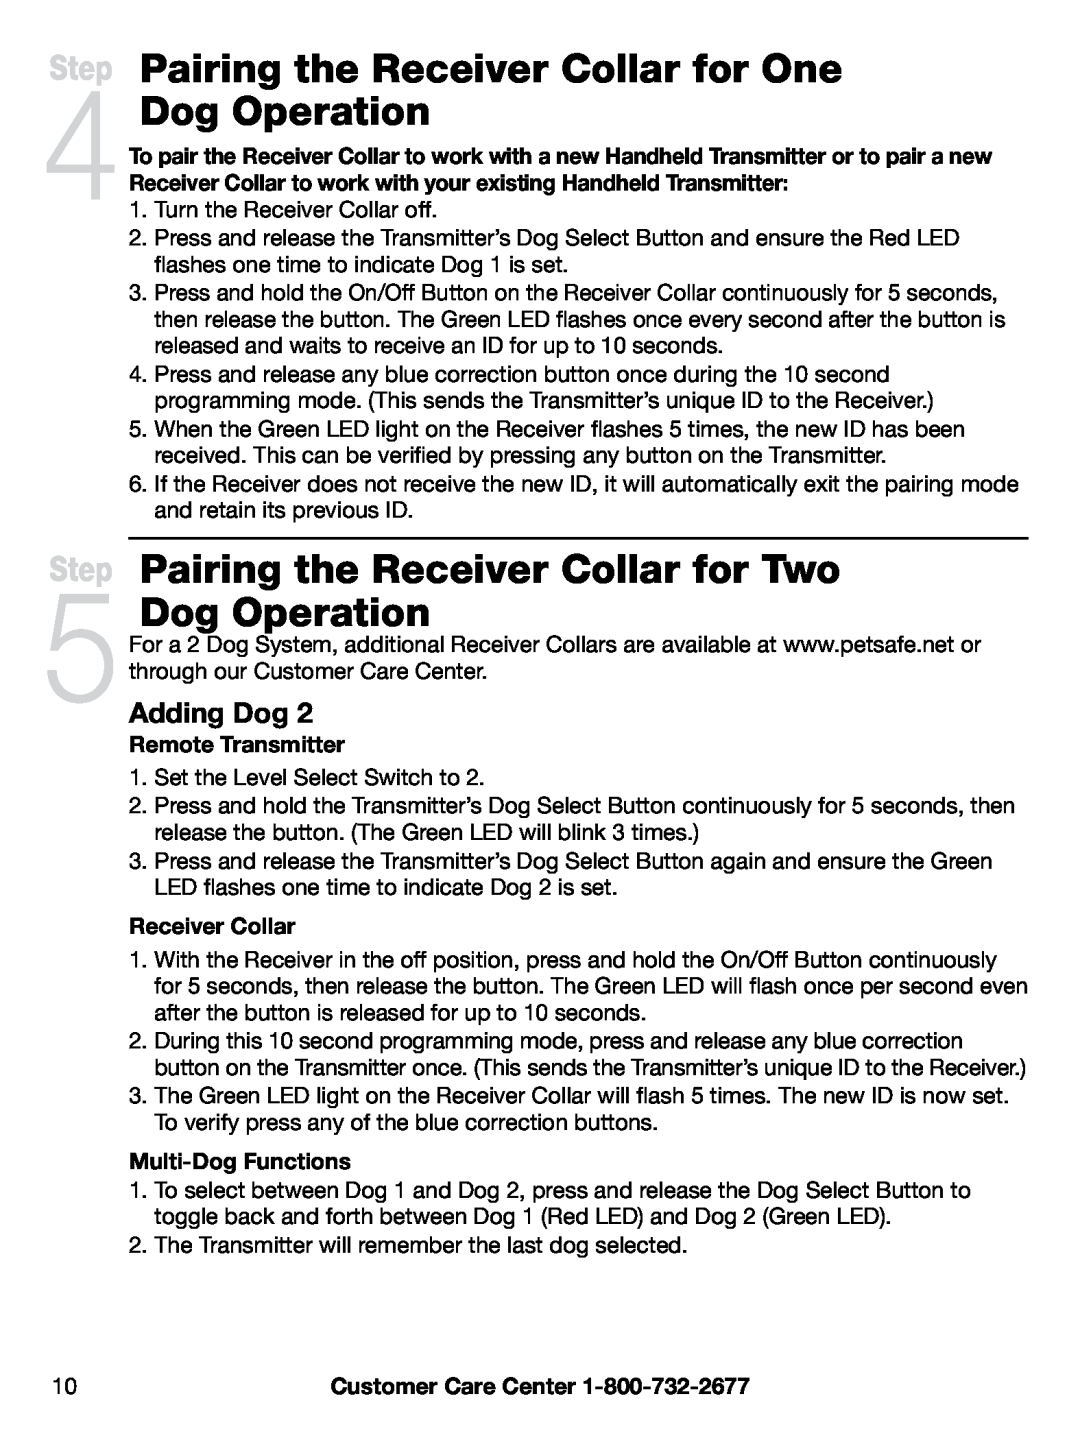 Petsafe PAC00-12893 Pairing the Receiver Collar for One Dog Operation, Pairing the Receiver Collar for Two Dog Operation 